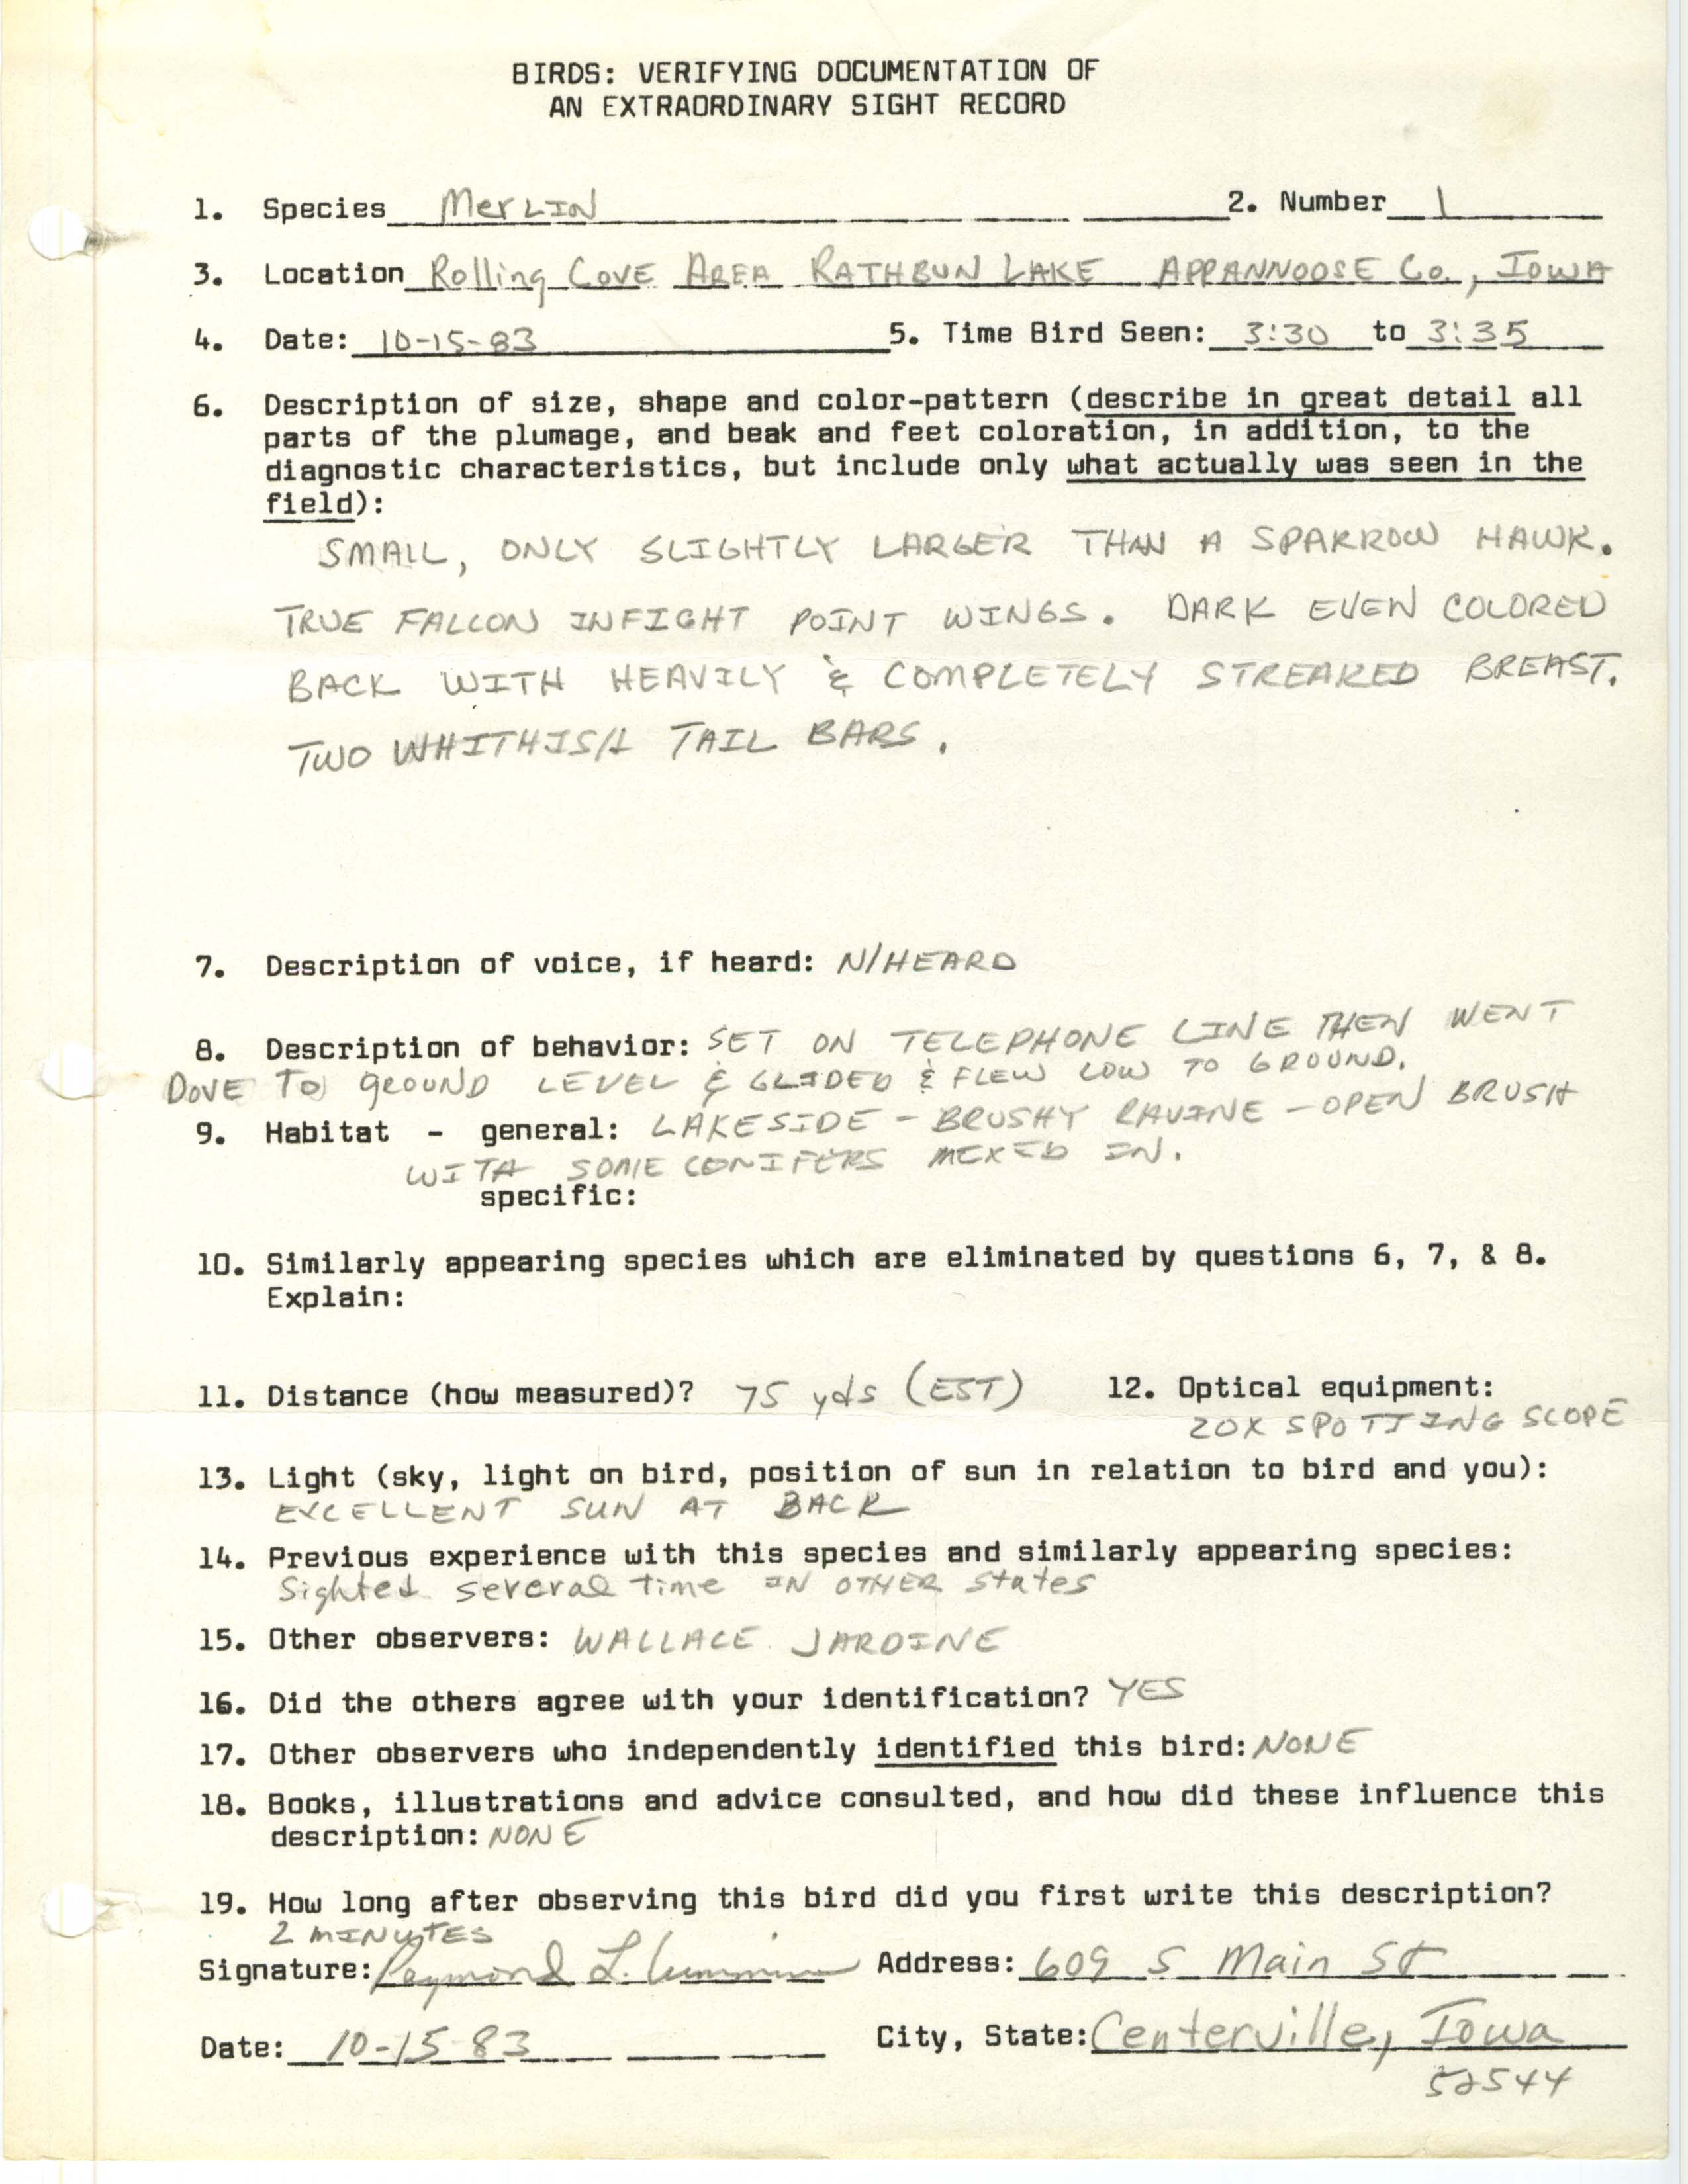 Rare bird documentation form for Merlin at Rolling Cove Area, 1983